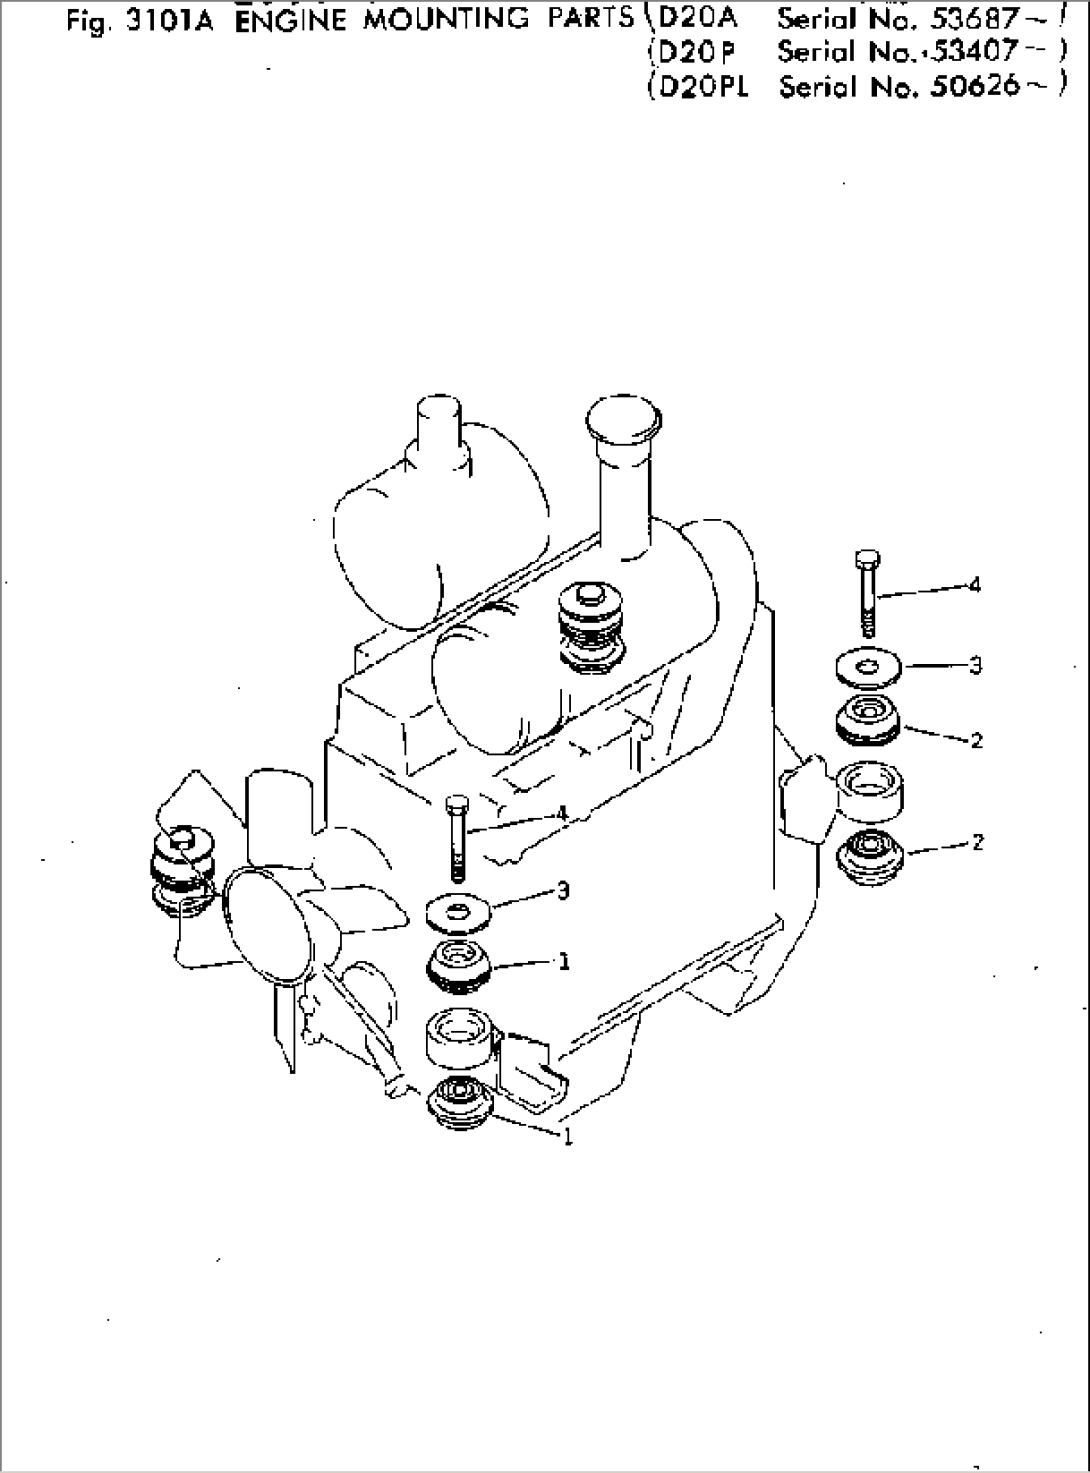 ENGINE MOUNTING PARTS(#53687-)